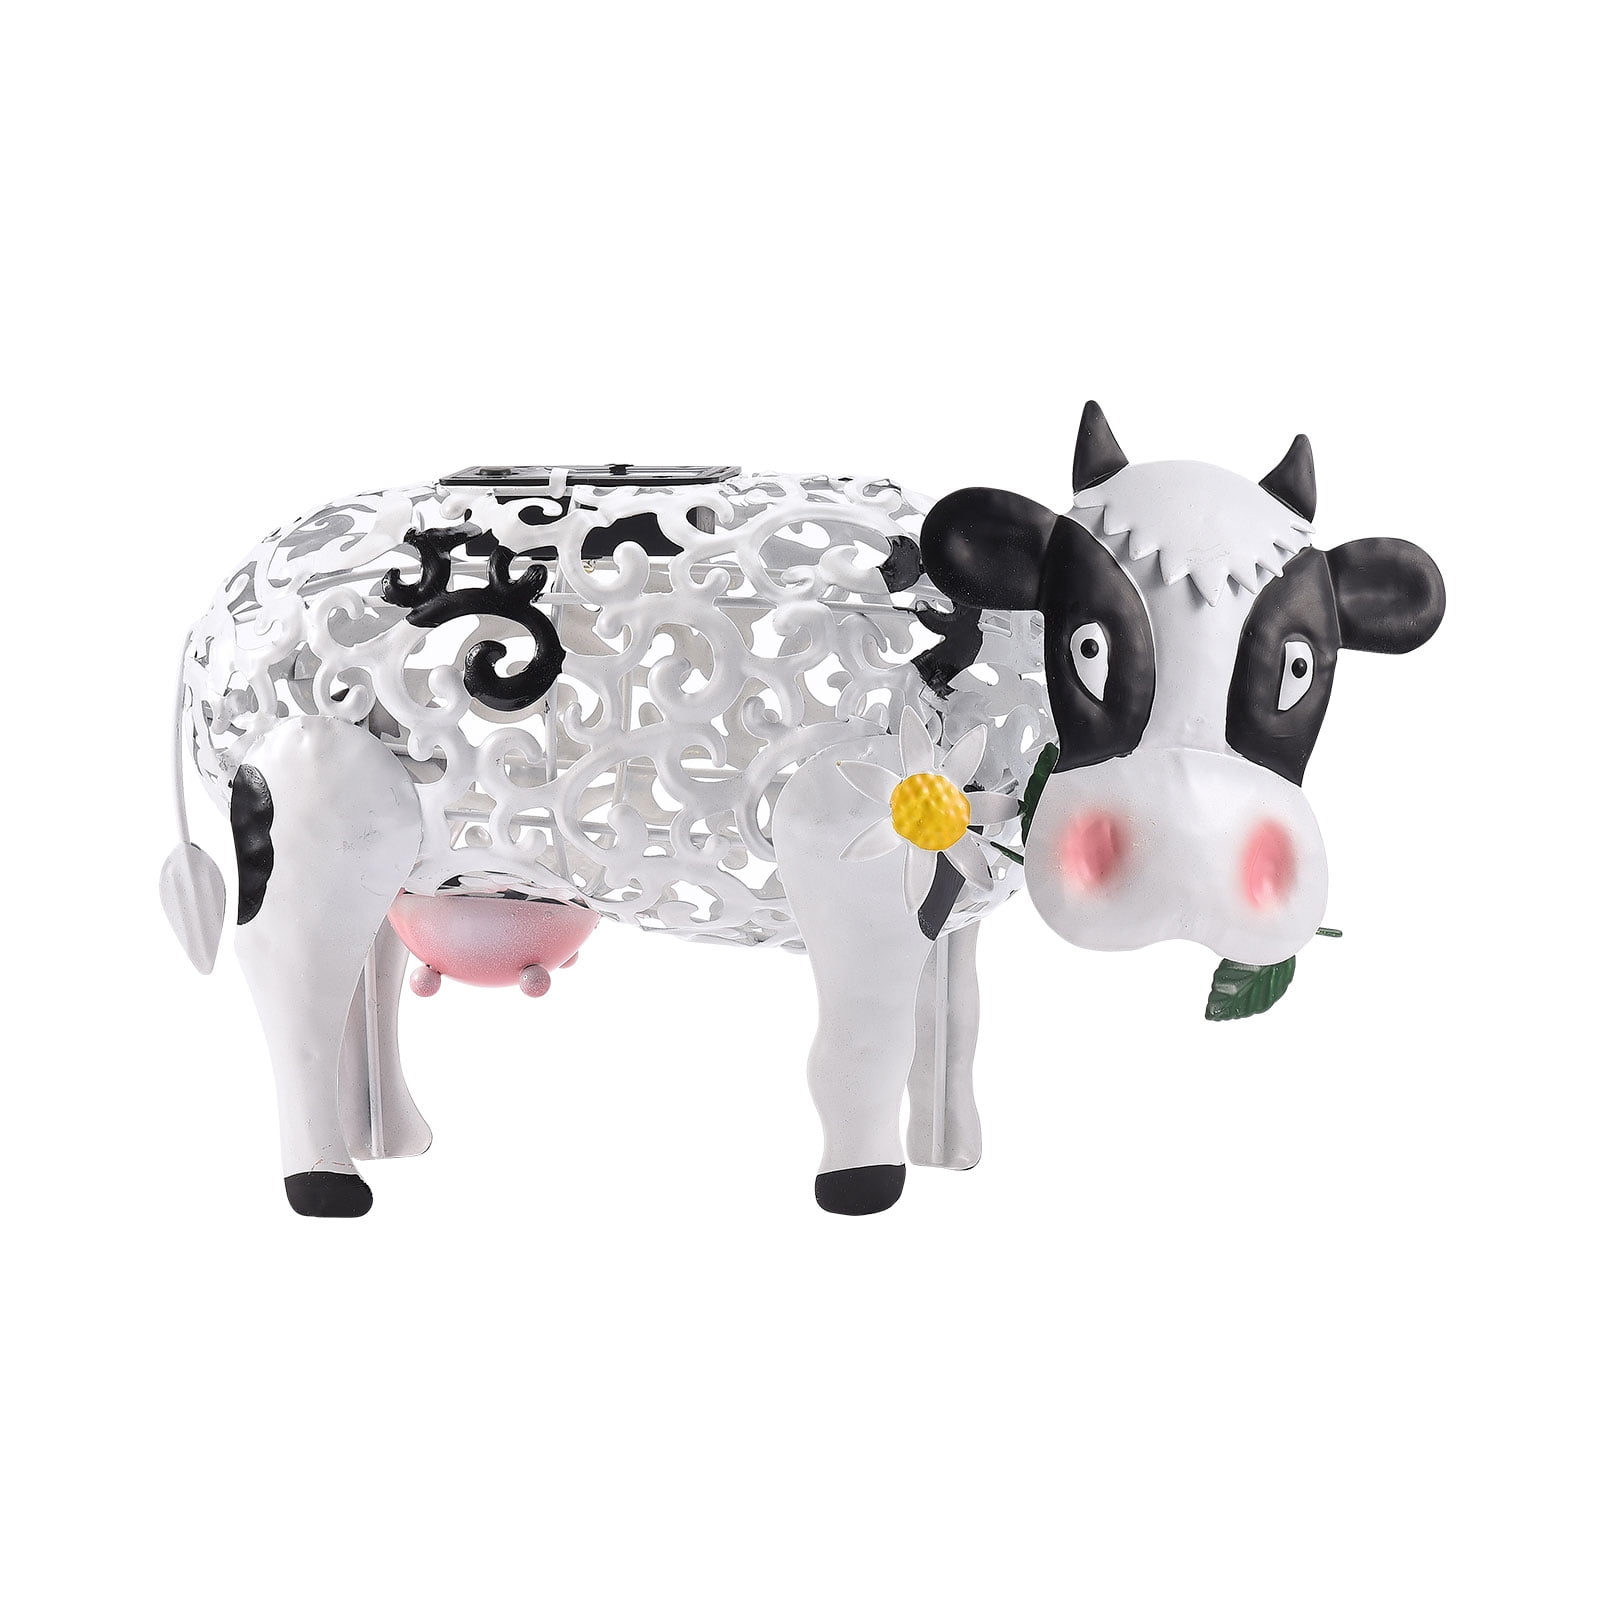 Hapeisy Cow Decor, Solar Garden Daisy Cow Light, Lawn Landscape Outdoor Led  Decor Color Changing Light，Can Be Used for Garden Decoration, Home Decor, 